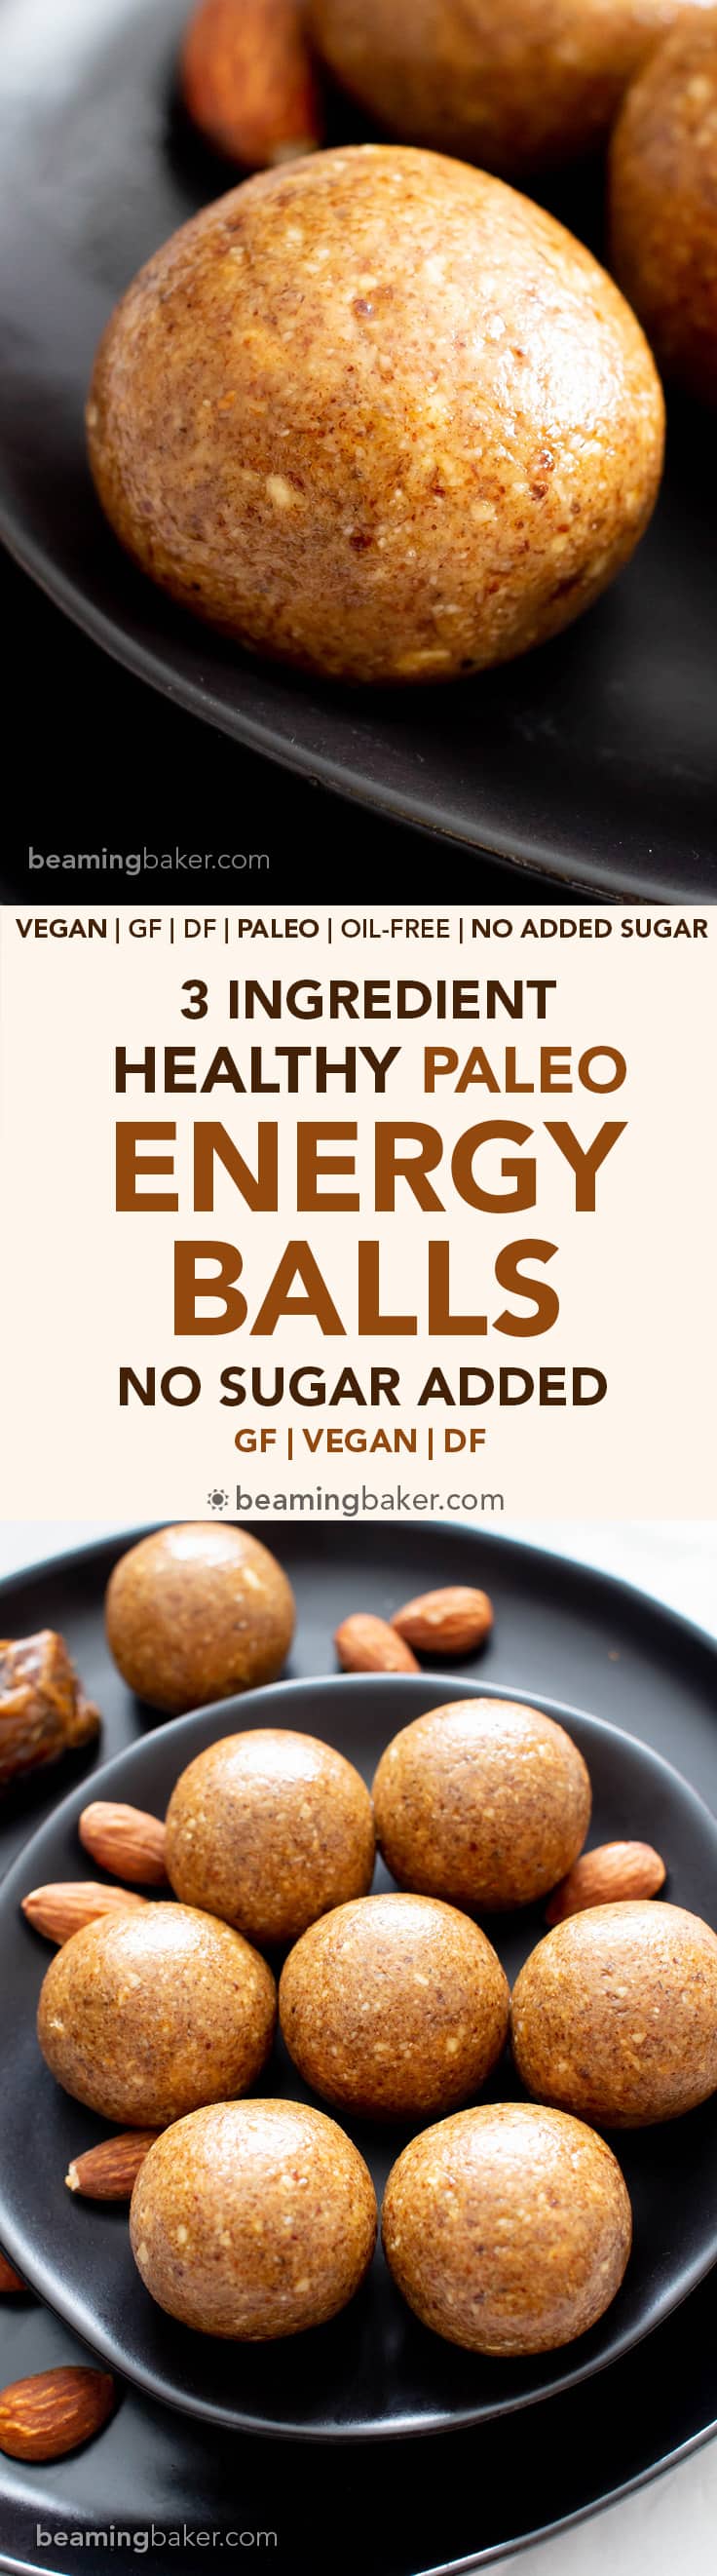 3 Ingredient Healthy No Sugar Added Paleo Energy Balls (V, GF): a fruit-sweetened recipe for salty ‘n sweet healthy energy balls! Oil-Free, Paleo, Vegan, Gluten-Free, Dairy-Free, Low-Carb, No Sugar Added. Just 39 calories per ball, 7 grams of carbs & 1 gram of fat! #EnergyBalls #HealthySnacks #Vegan #GlutenFree #DairyFree #NoSugarAdded | Recipe at BeamingBaker.com